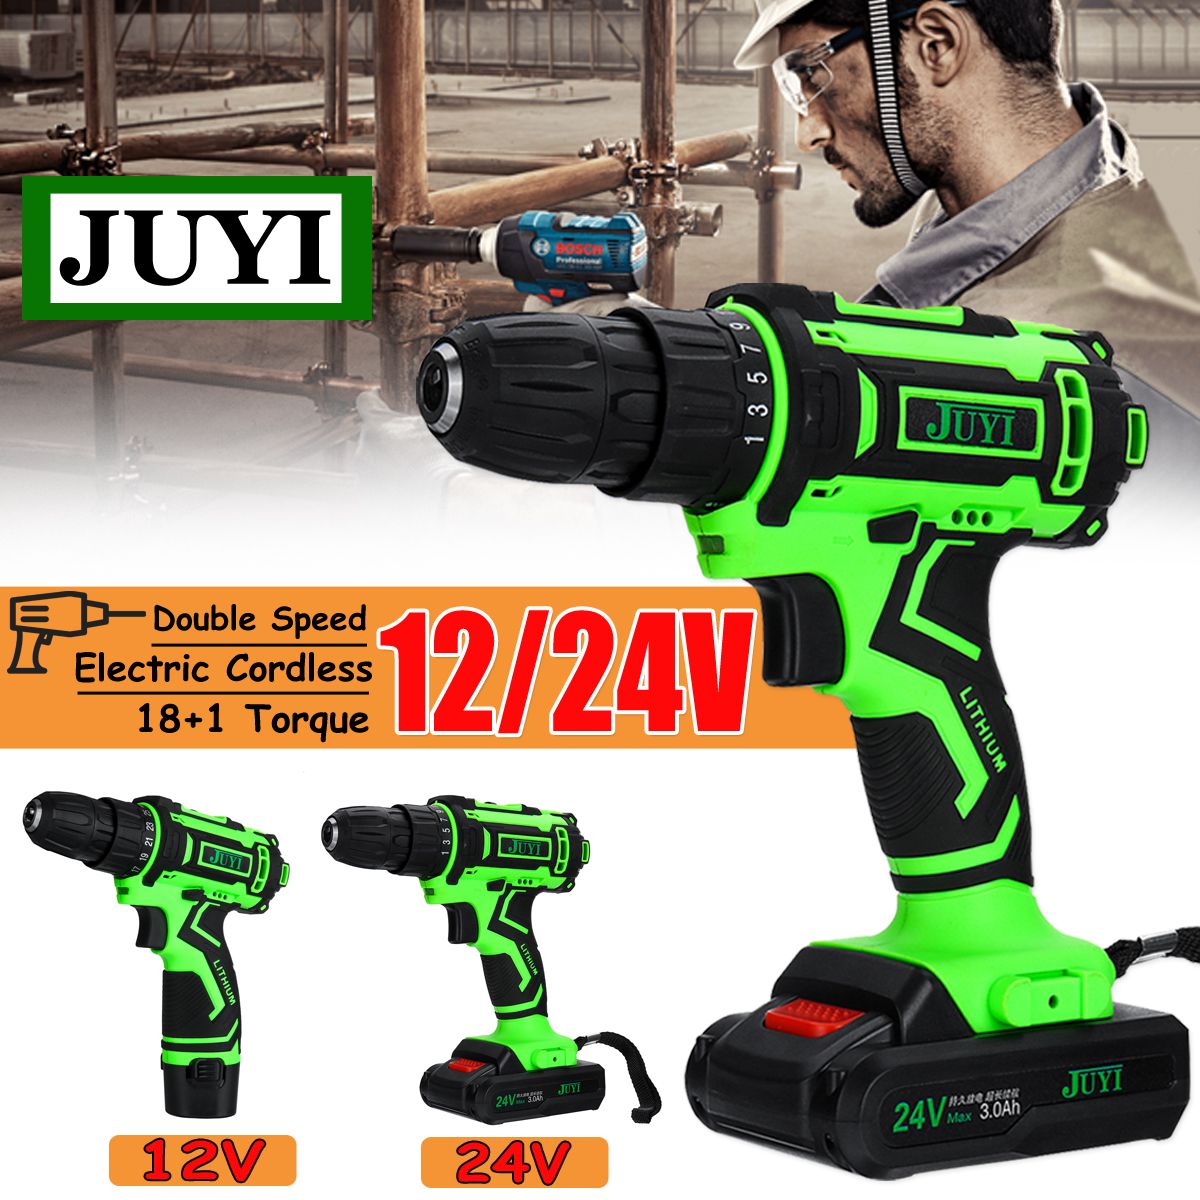 JUYI-12V24V-Lithium-Battery-Power-Drill-Cordless-Rechargeable-2-Speed-Electric-Driver-Drill-1557515